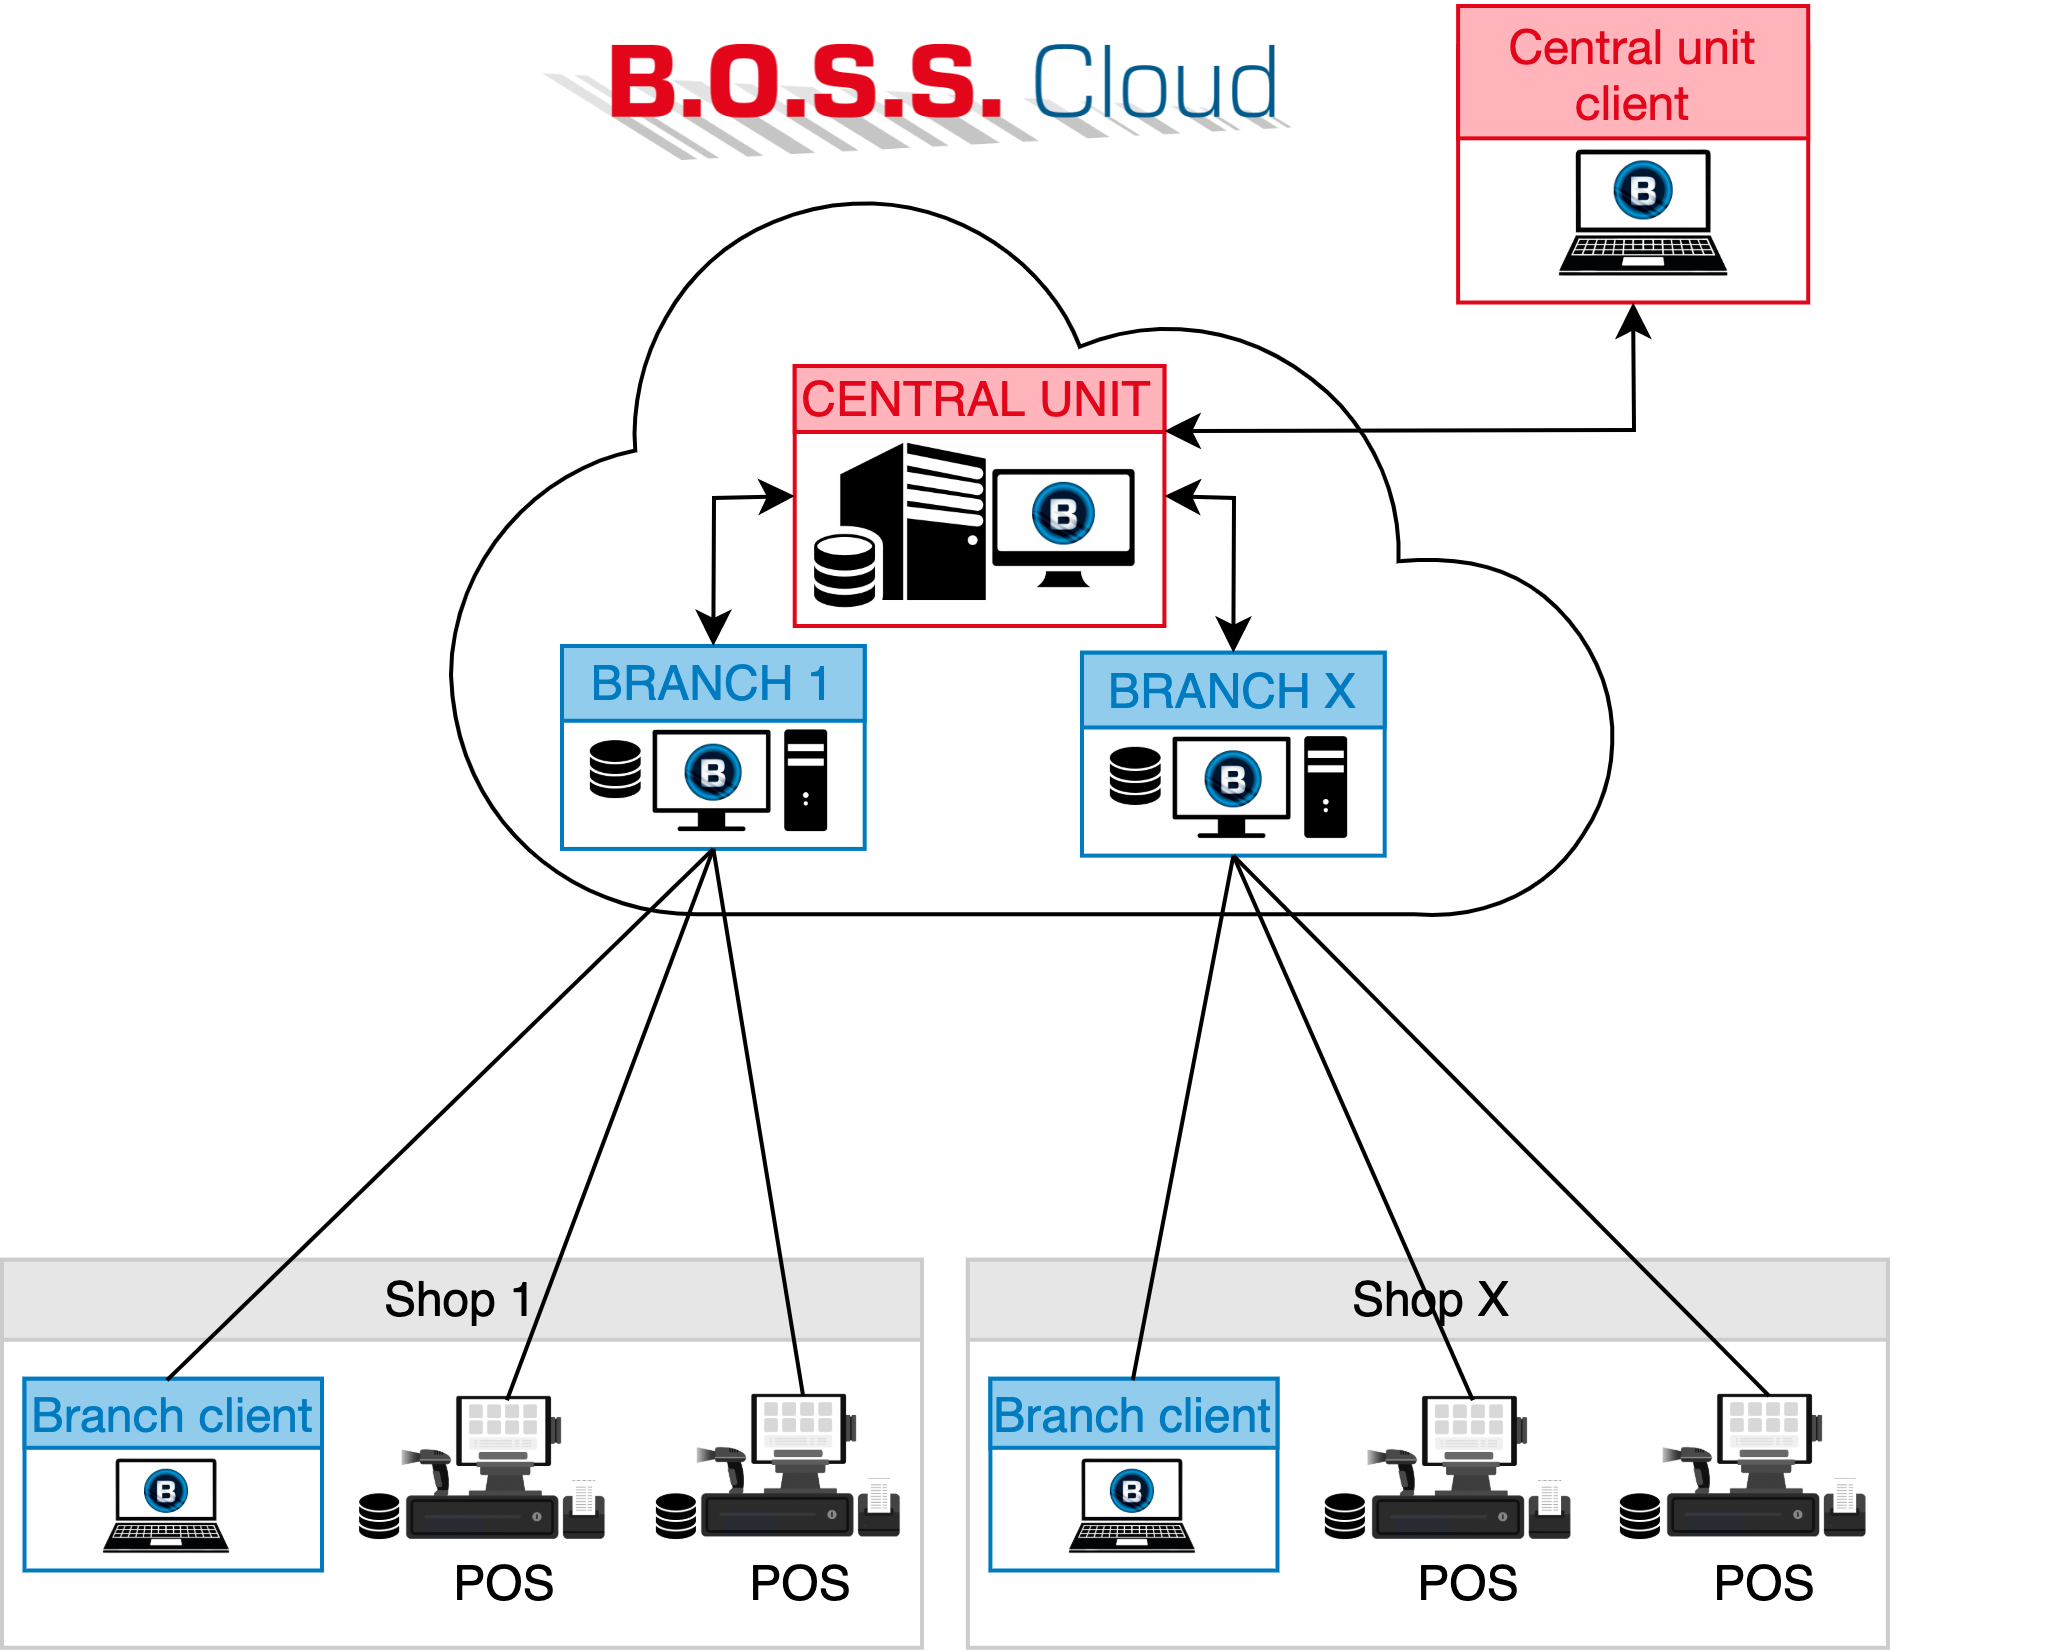 Central unit and branches in cloud, using cloud architecture